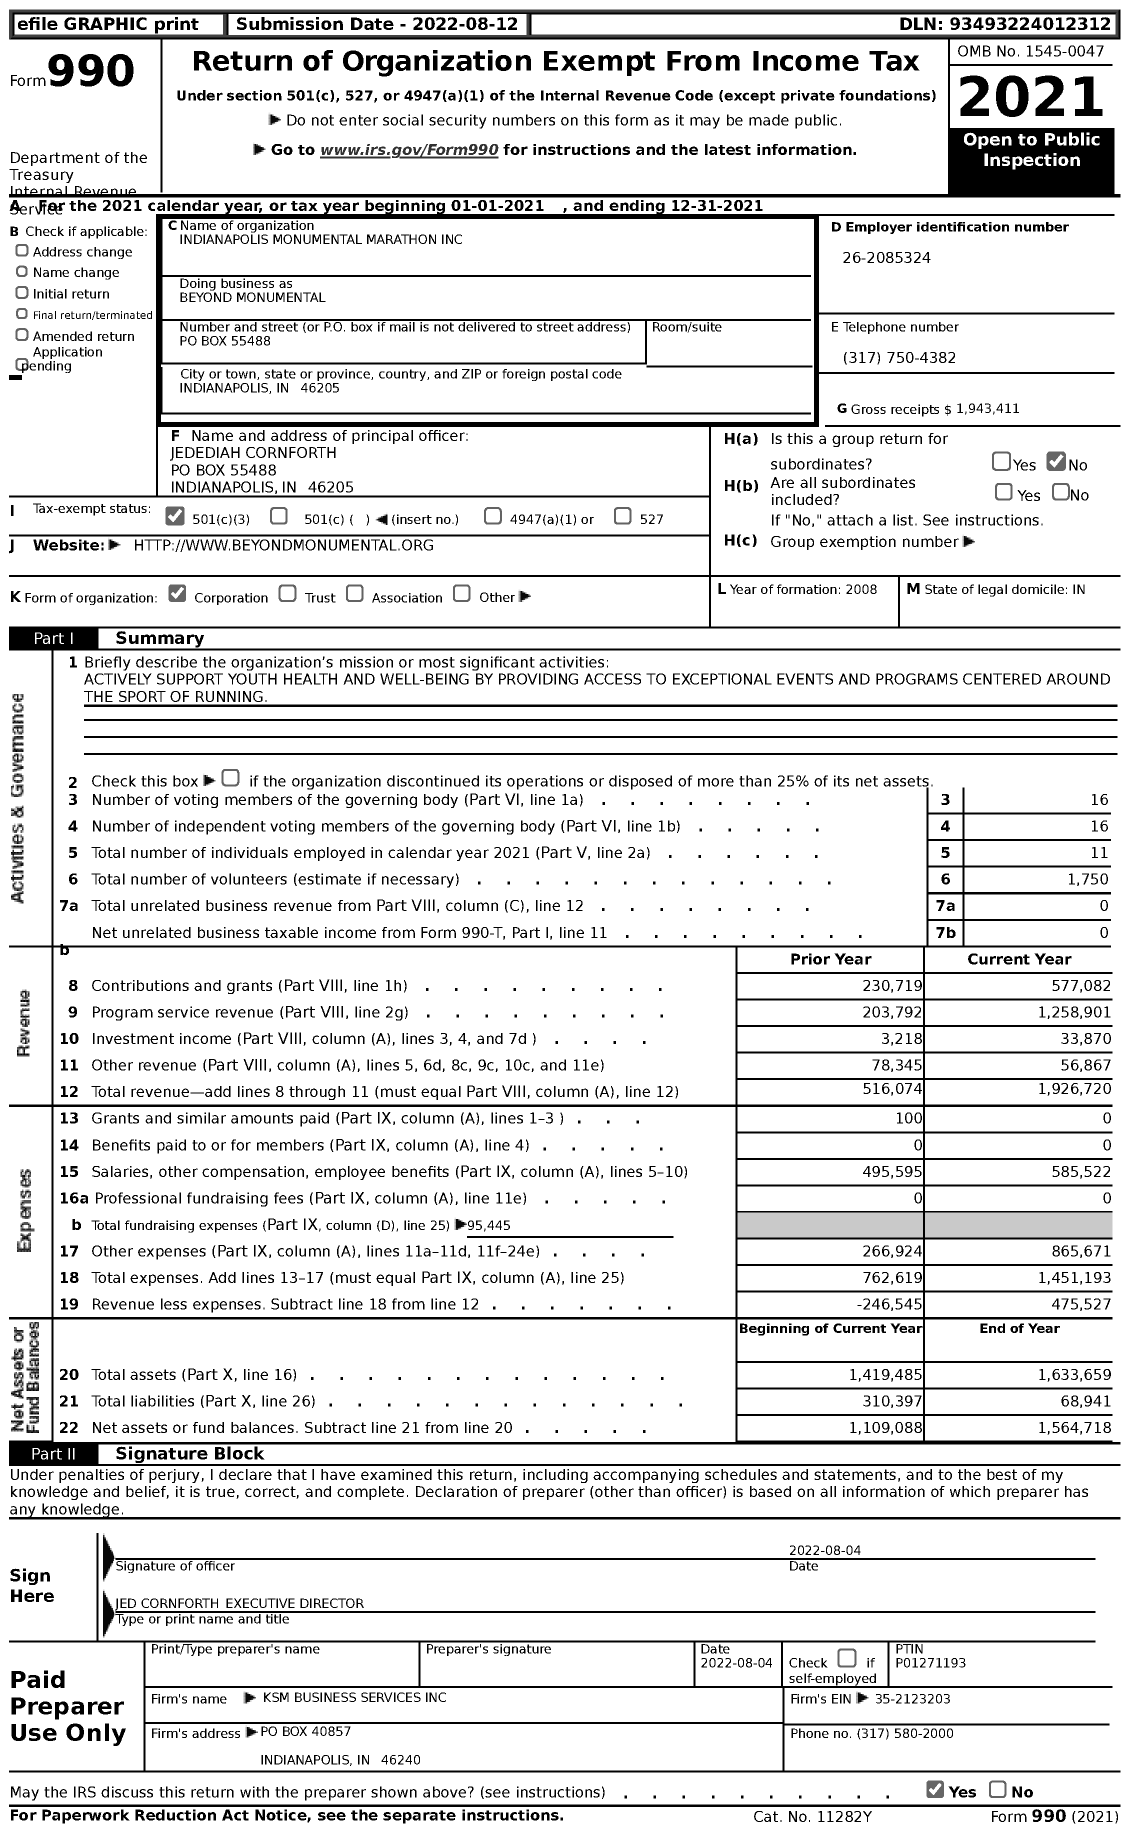 Image of first page of 2021 Form 990 for Beyond Monumental